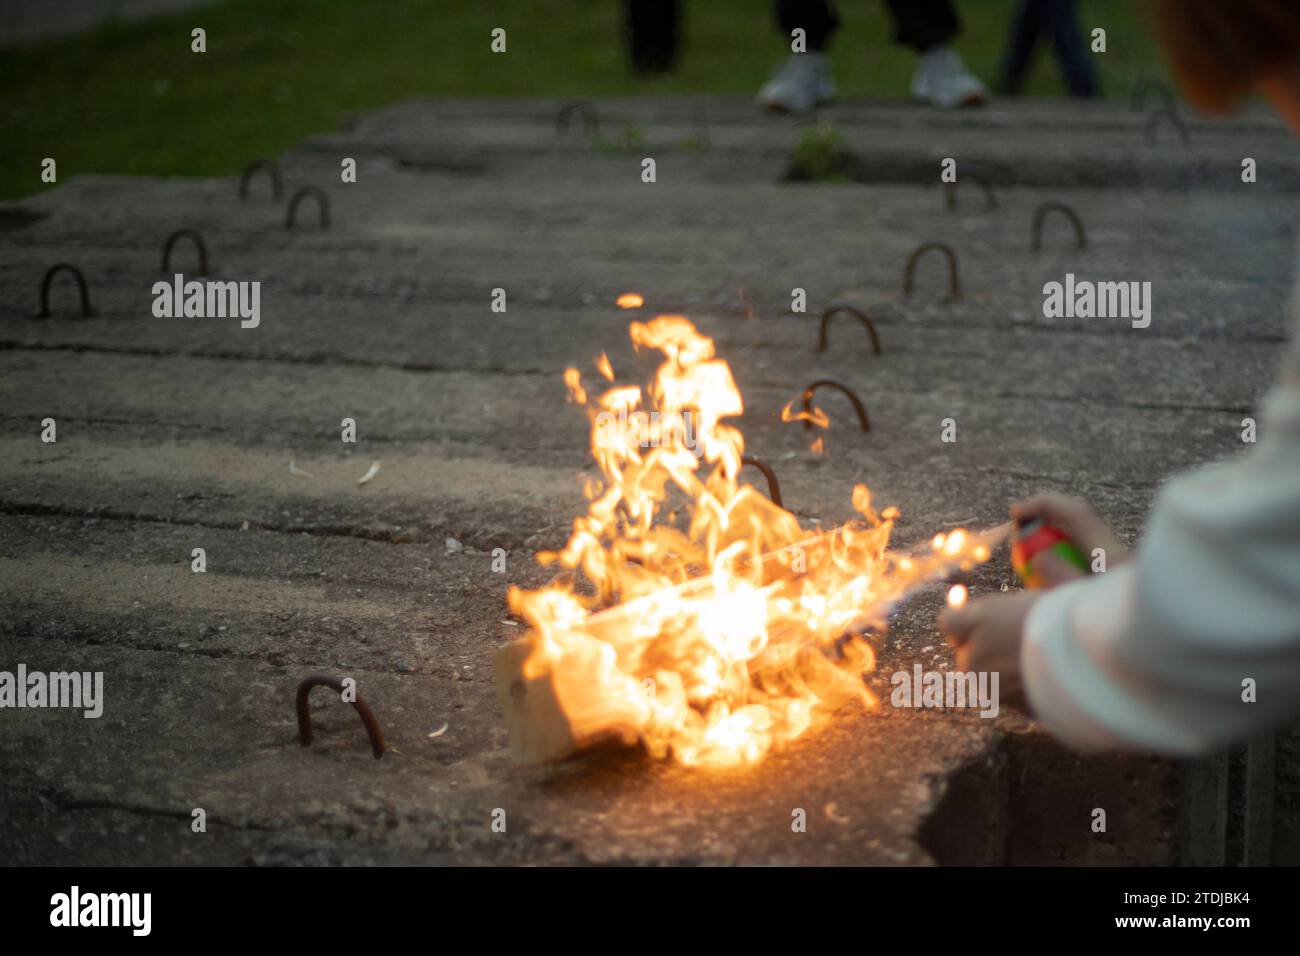 Spraying an aerosol on a flame. Waiting for gas from a spray can. Playing with fire. Dangerous flames. Stock Photo